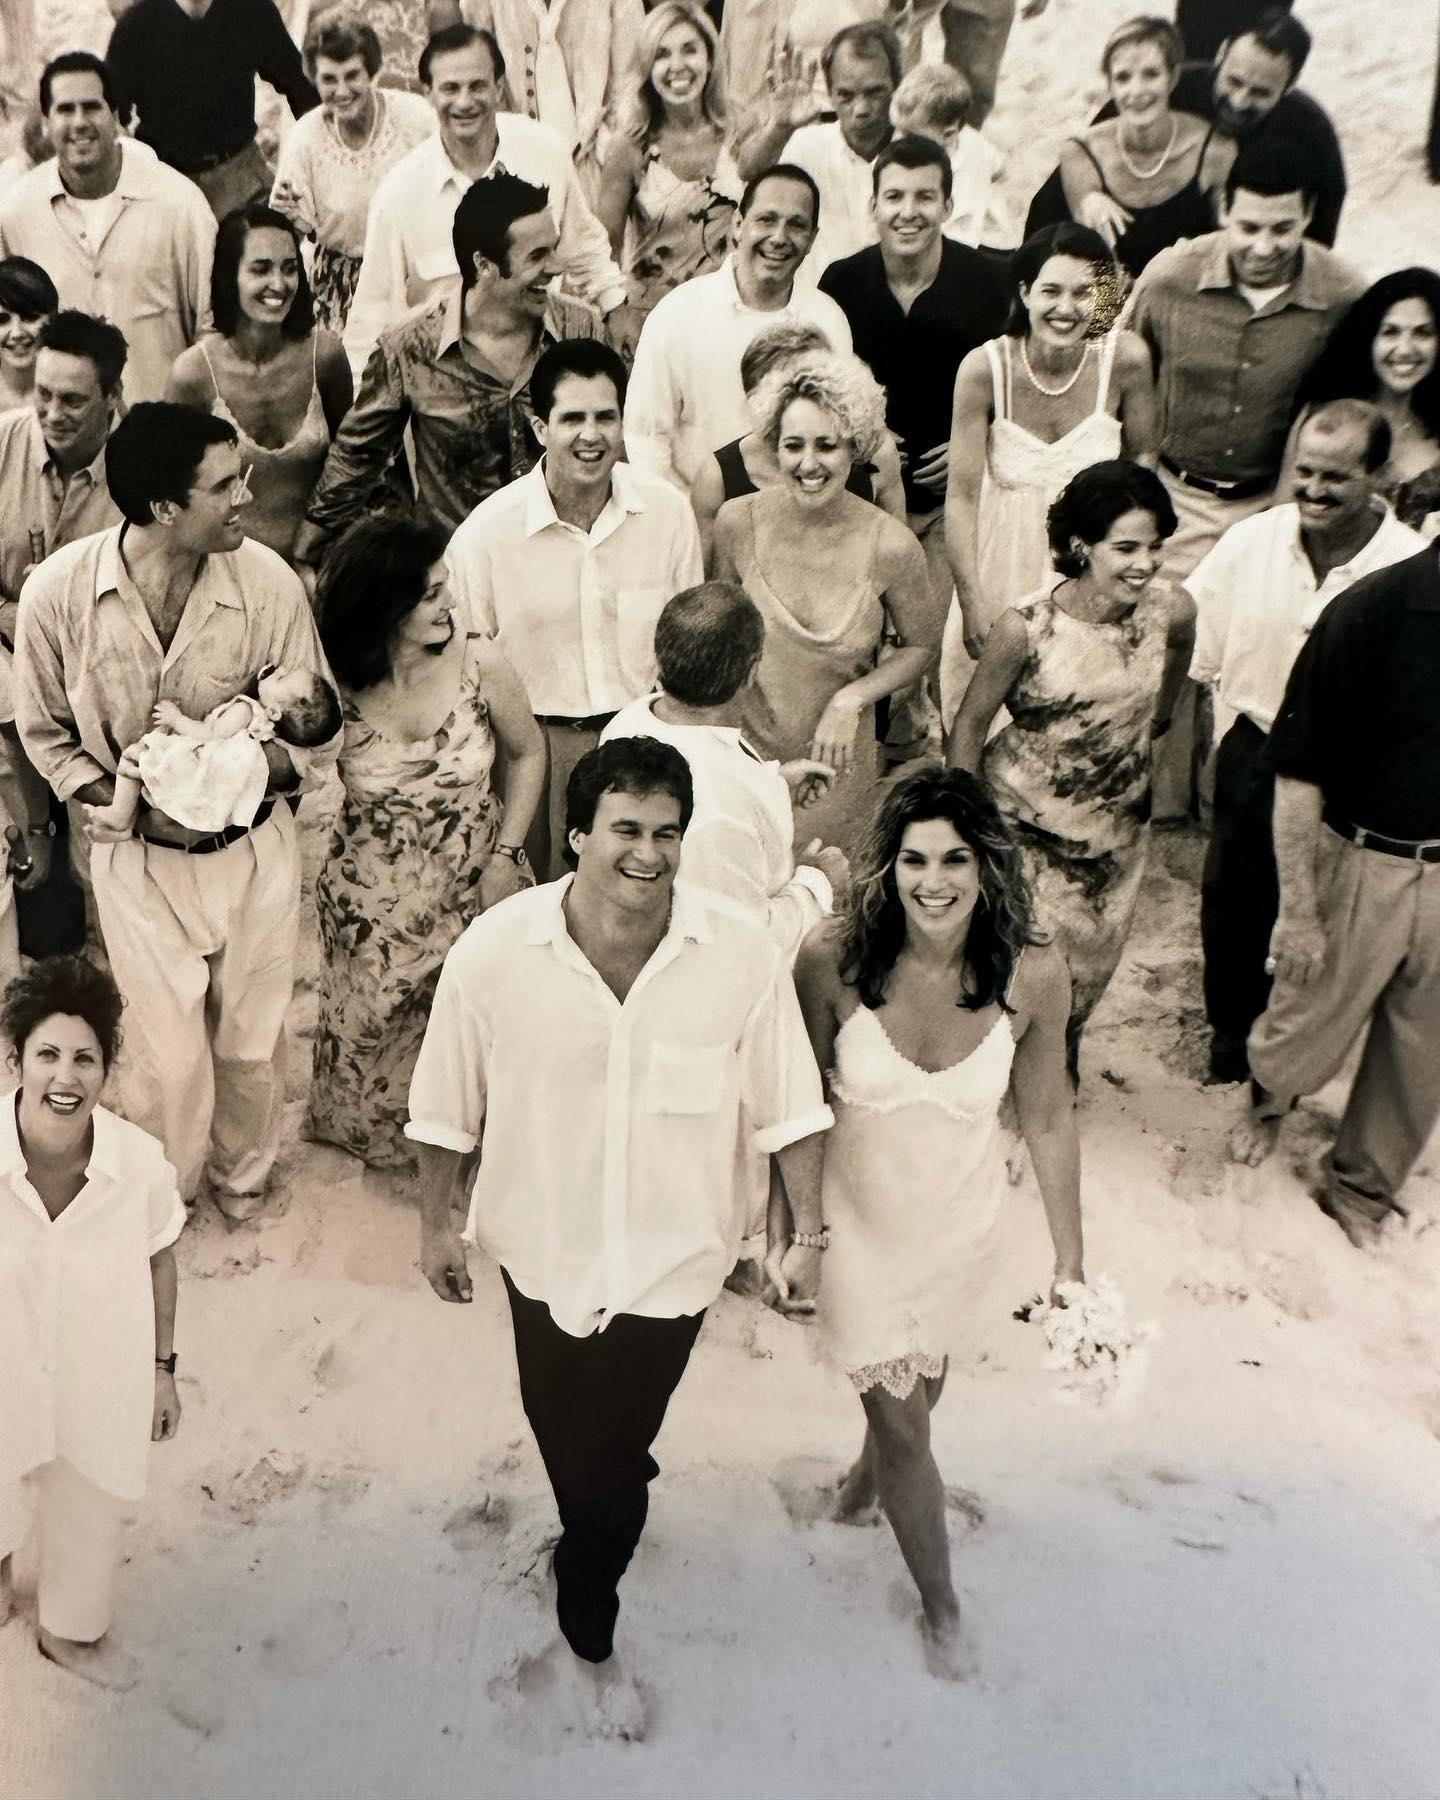 Photo shared by Cindy Crawford on May 29 2023 tagging @randegerber and @arthurelgort. May be an image of 7 people and wedding